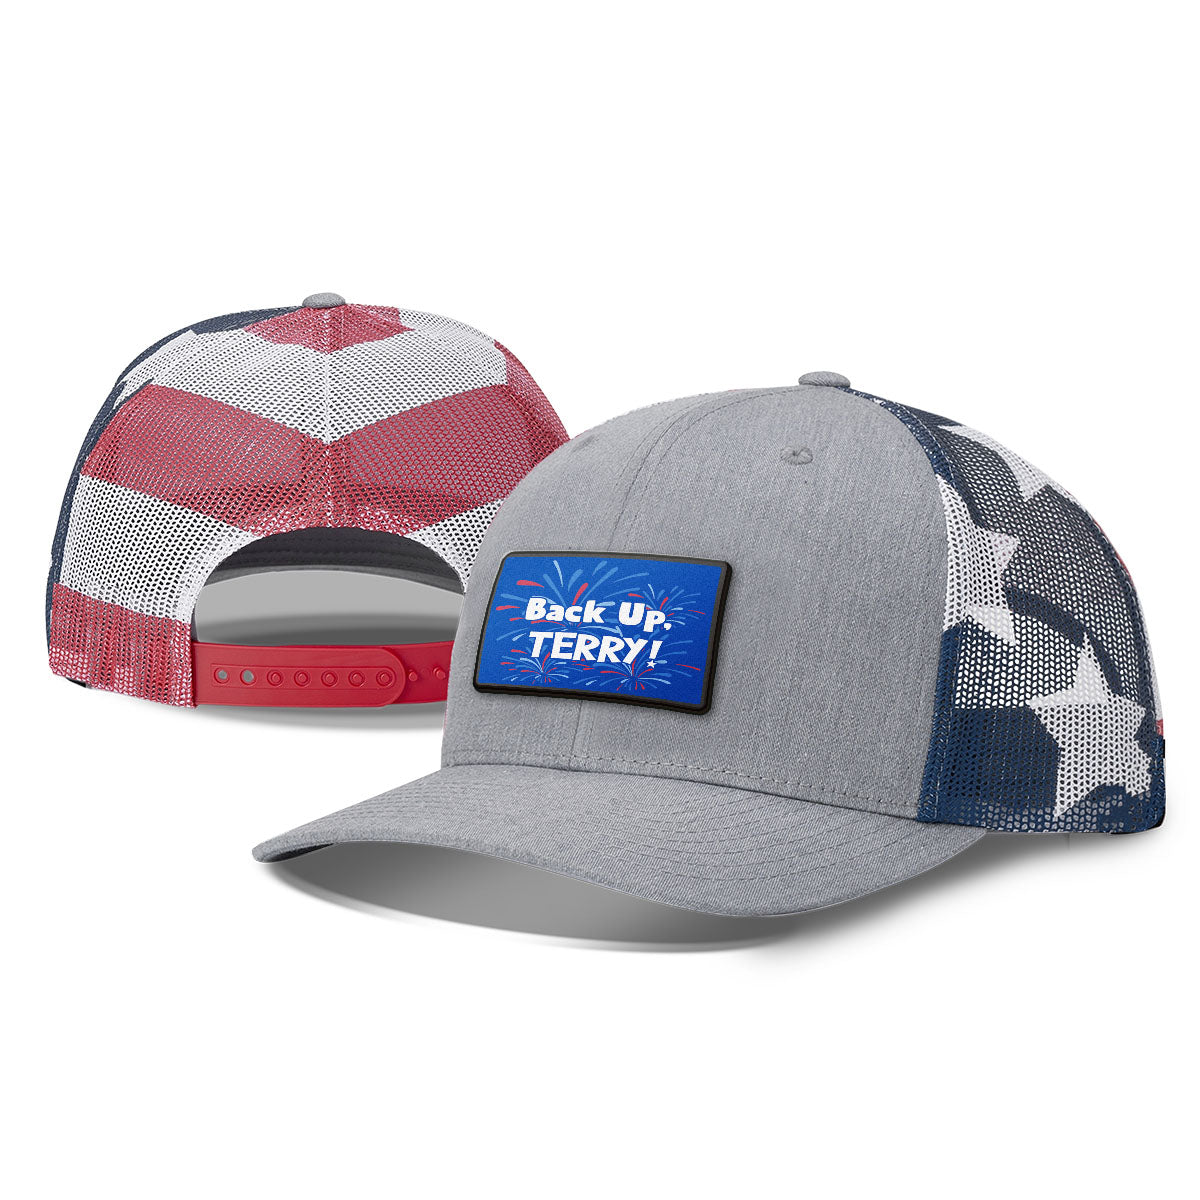 Back Up Terry! Patriotic Hats